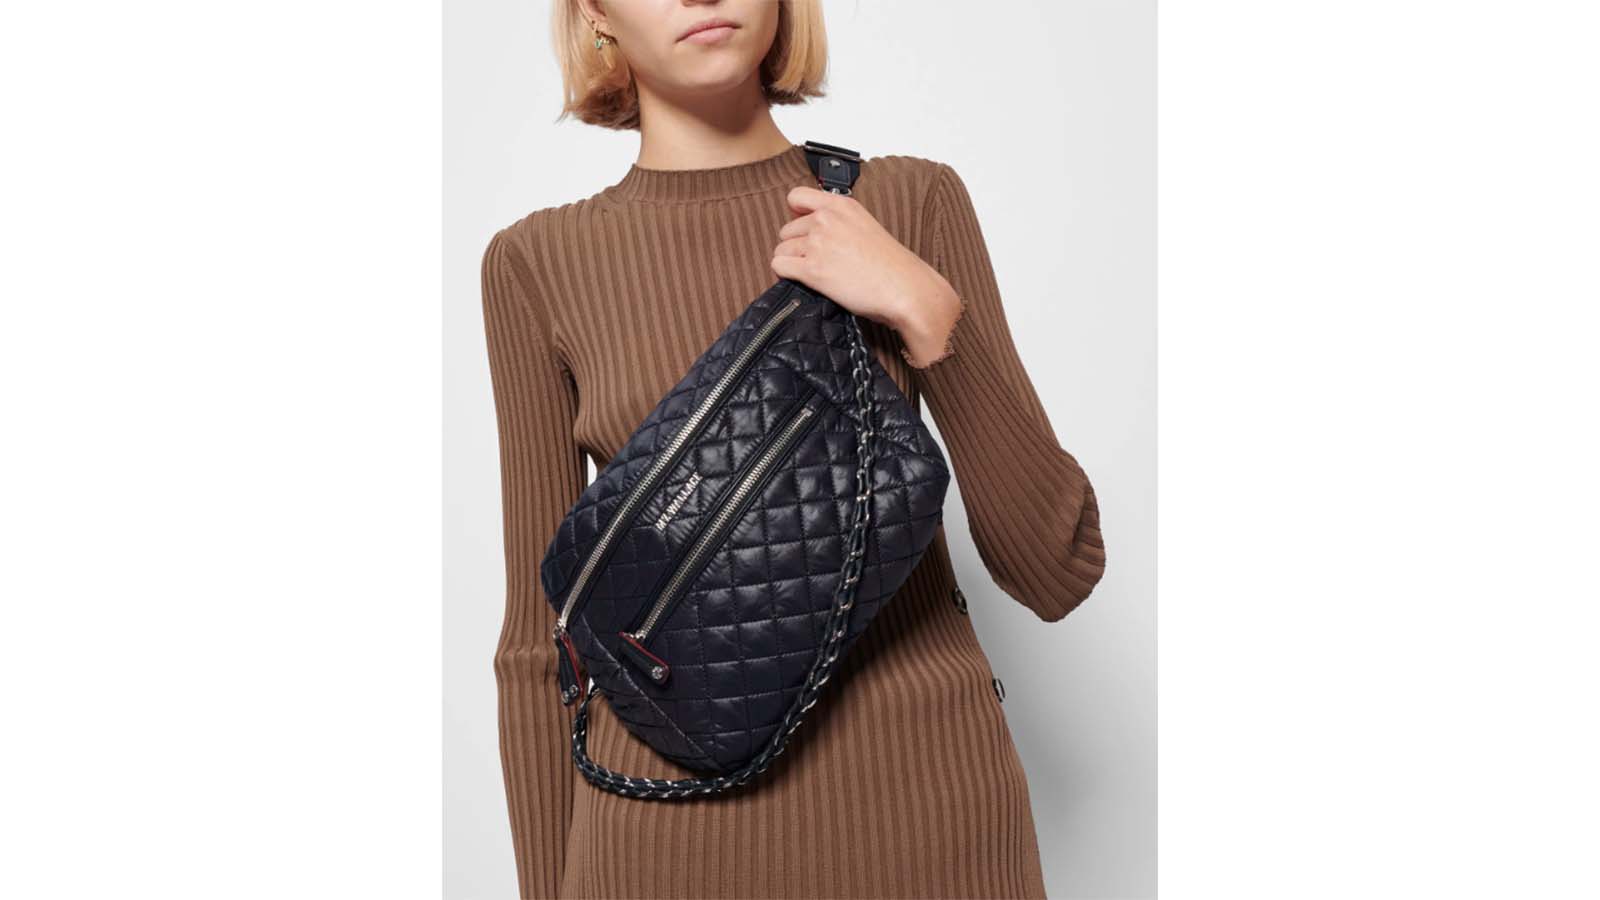 Where can I find stylish and functional crossbody sling bags for